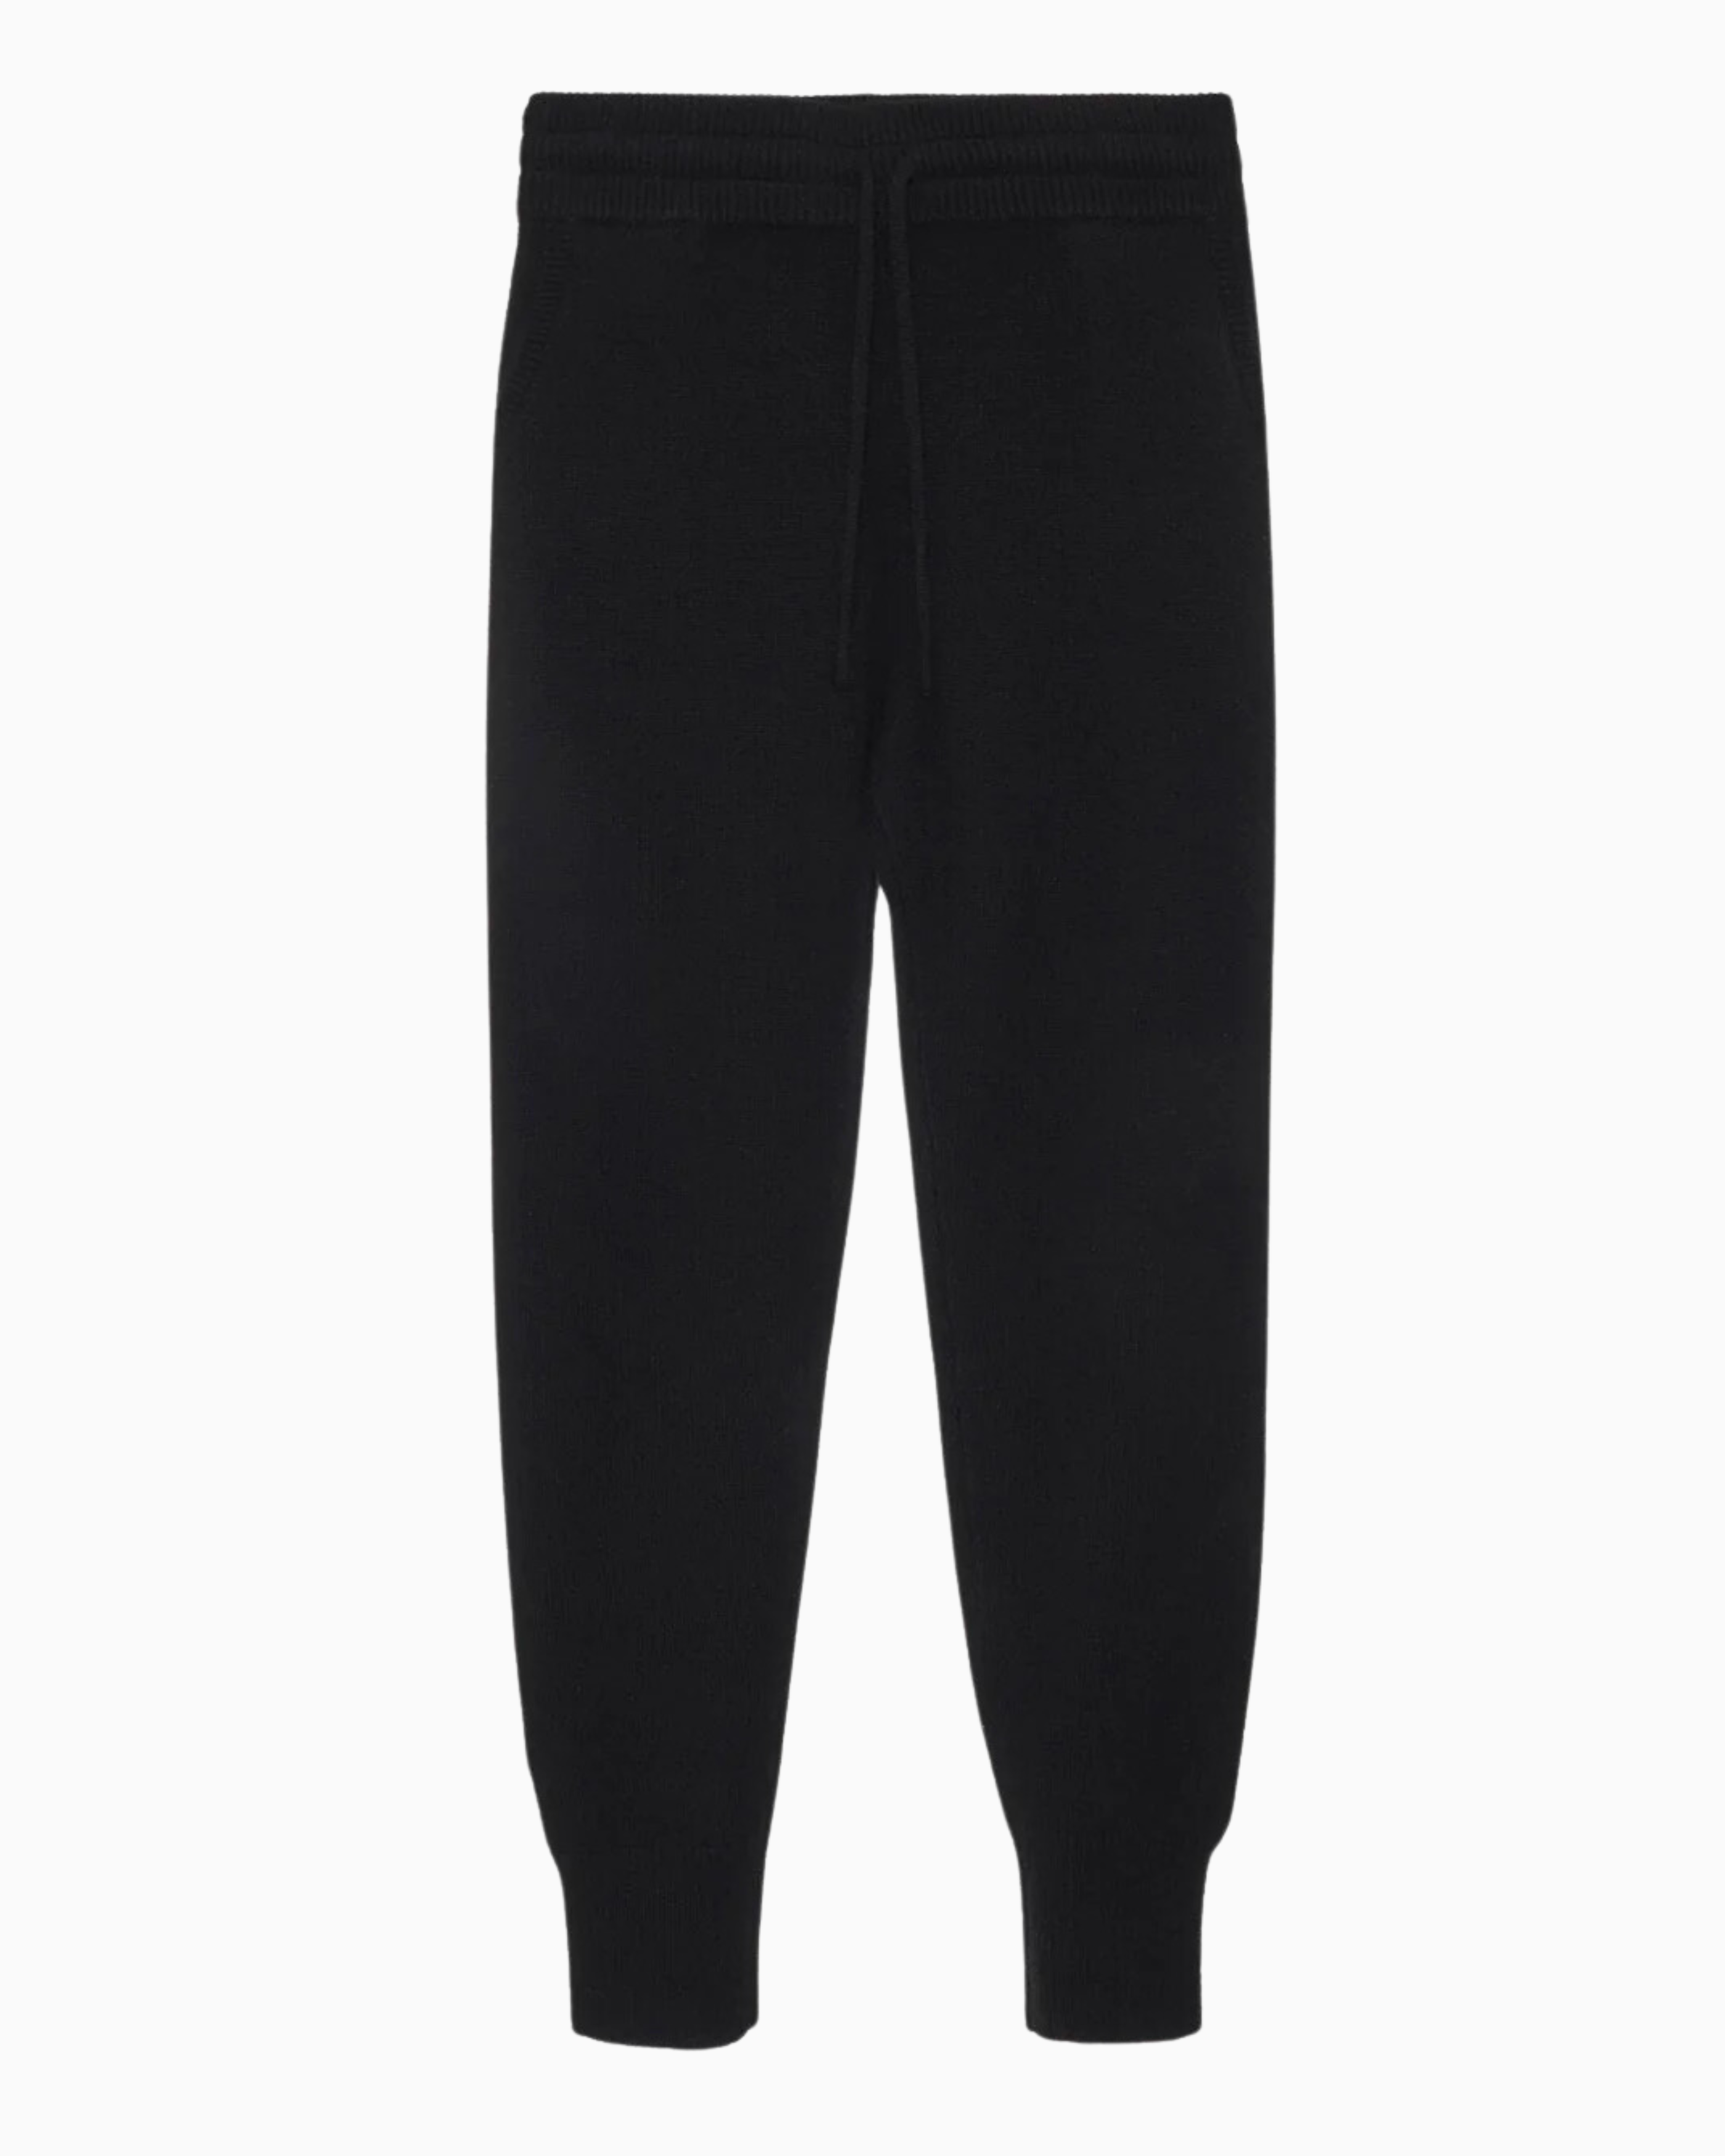 Anine Bing Angie Pant in Black